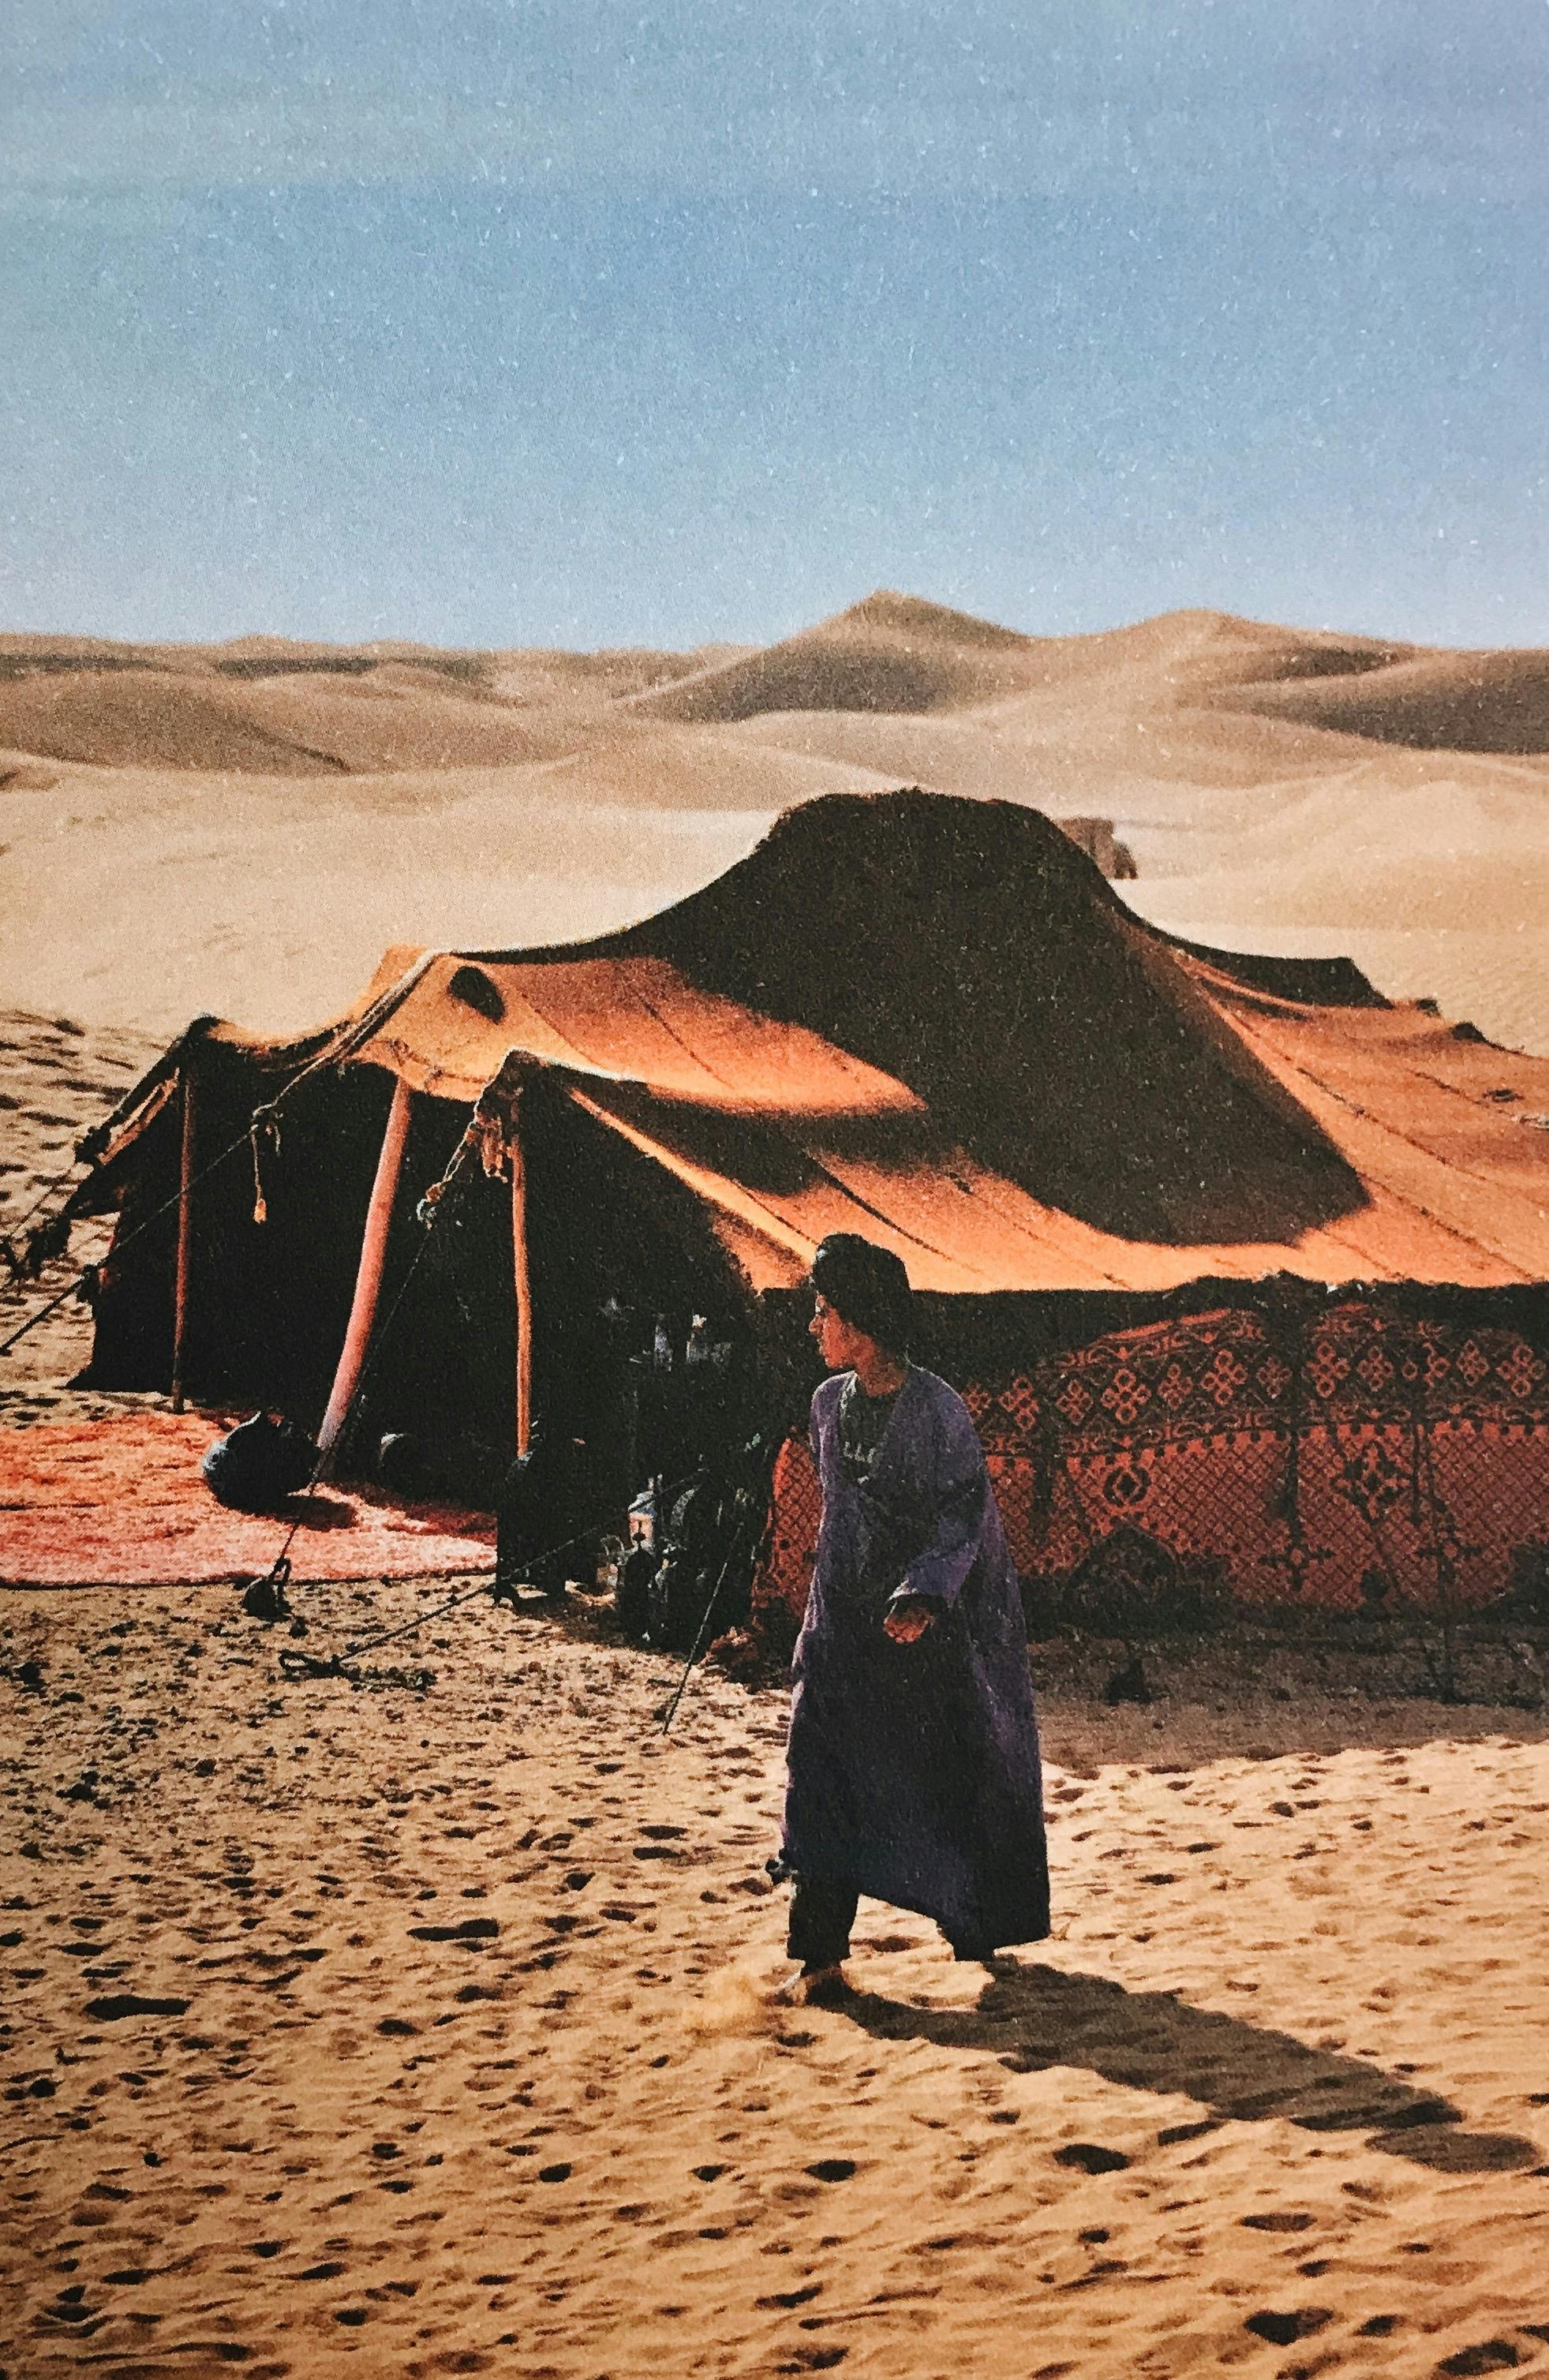 Bedouin and a haima in the desert